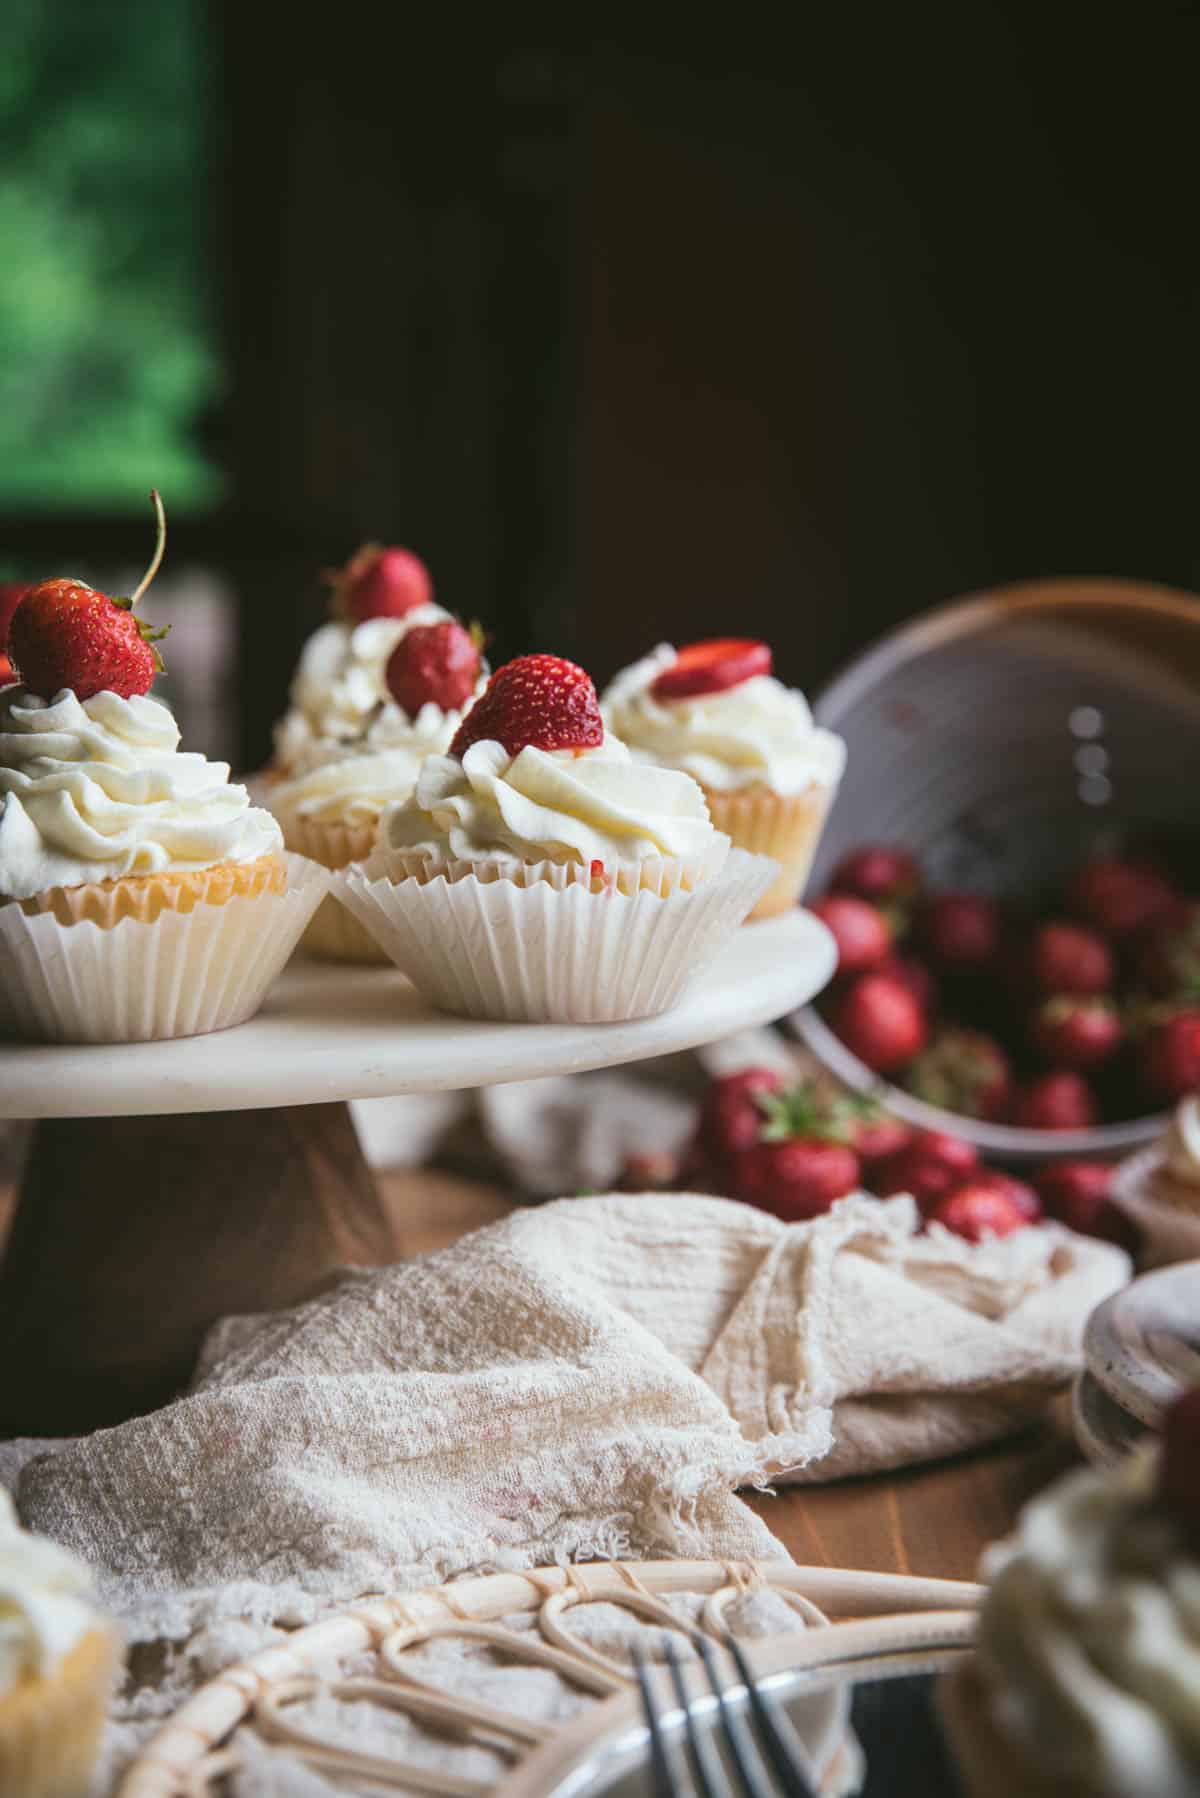 strawberry topped cupcakes on a cake stand with fresh strawberries in the background